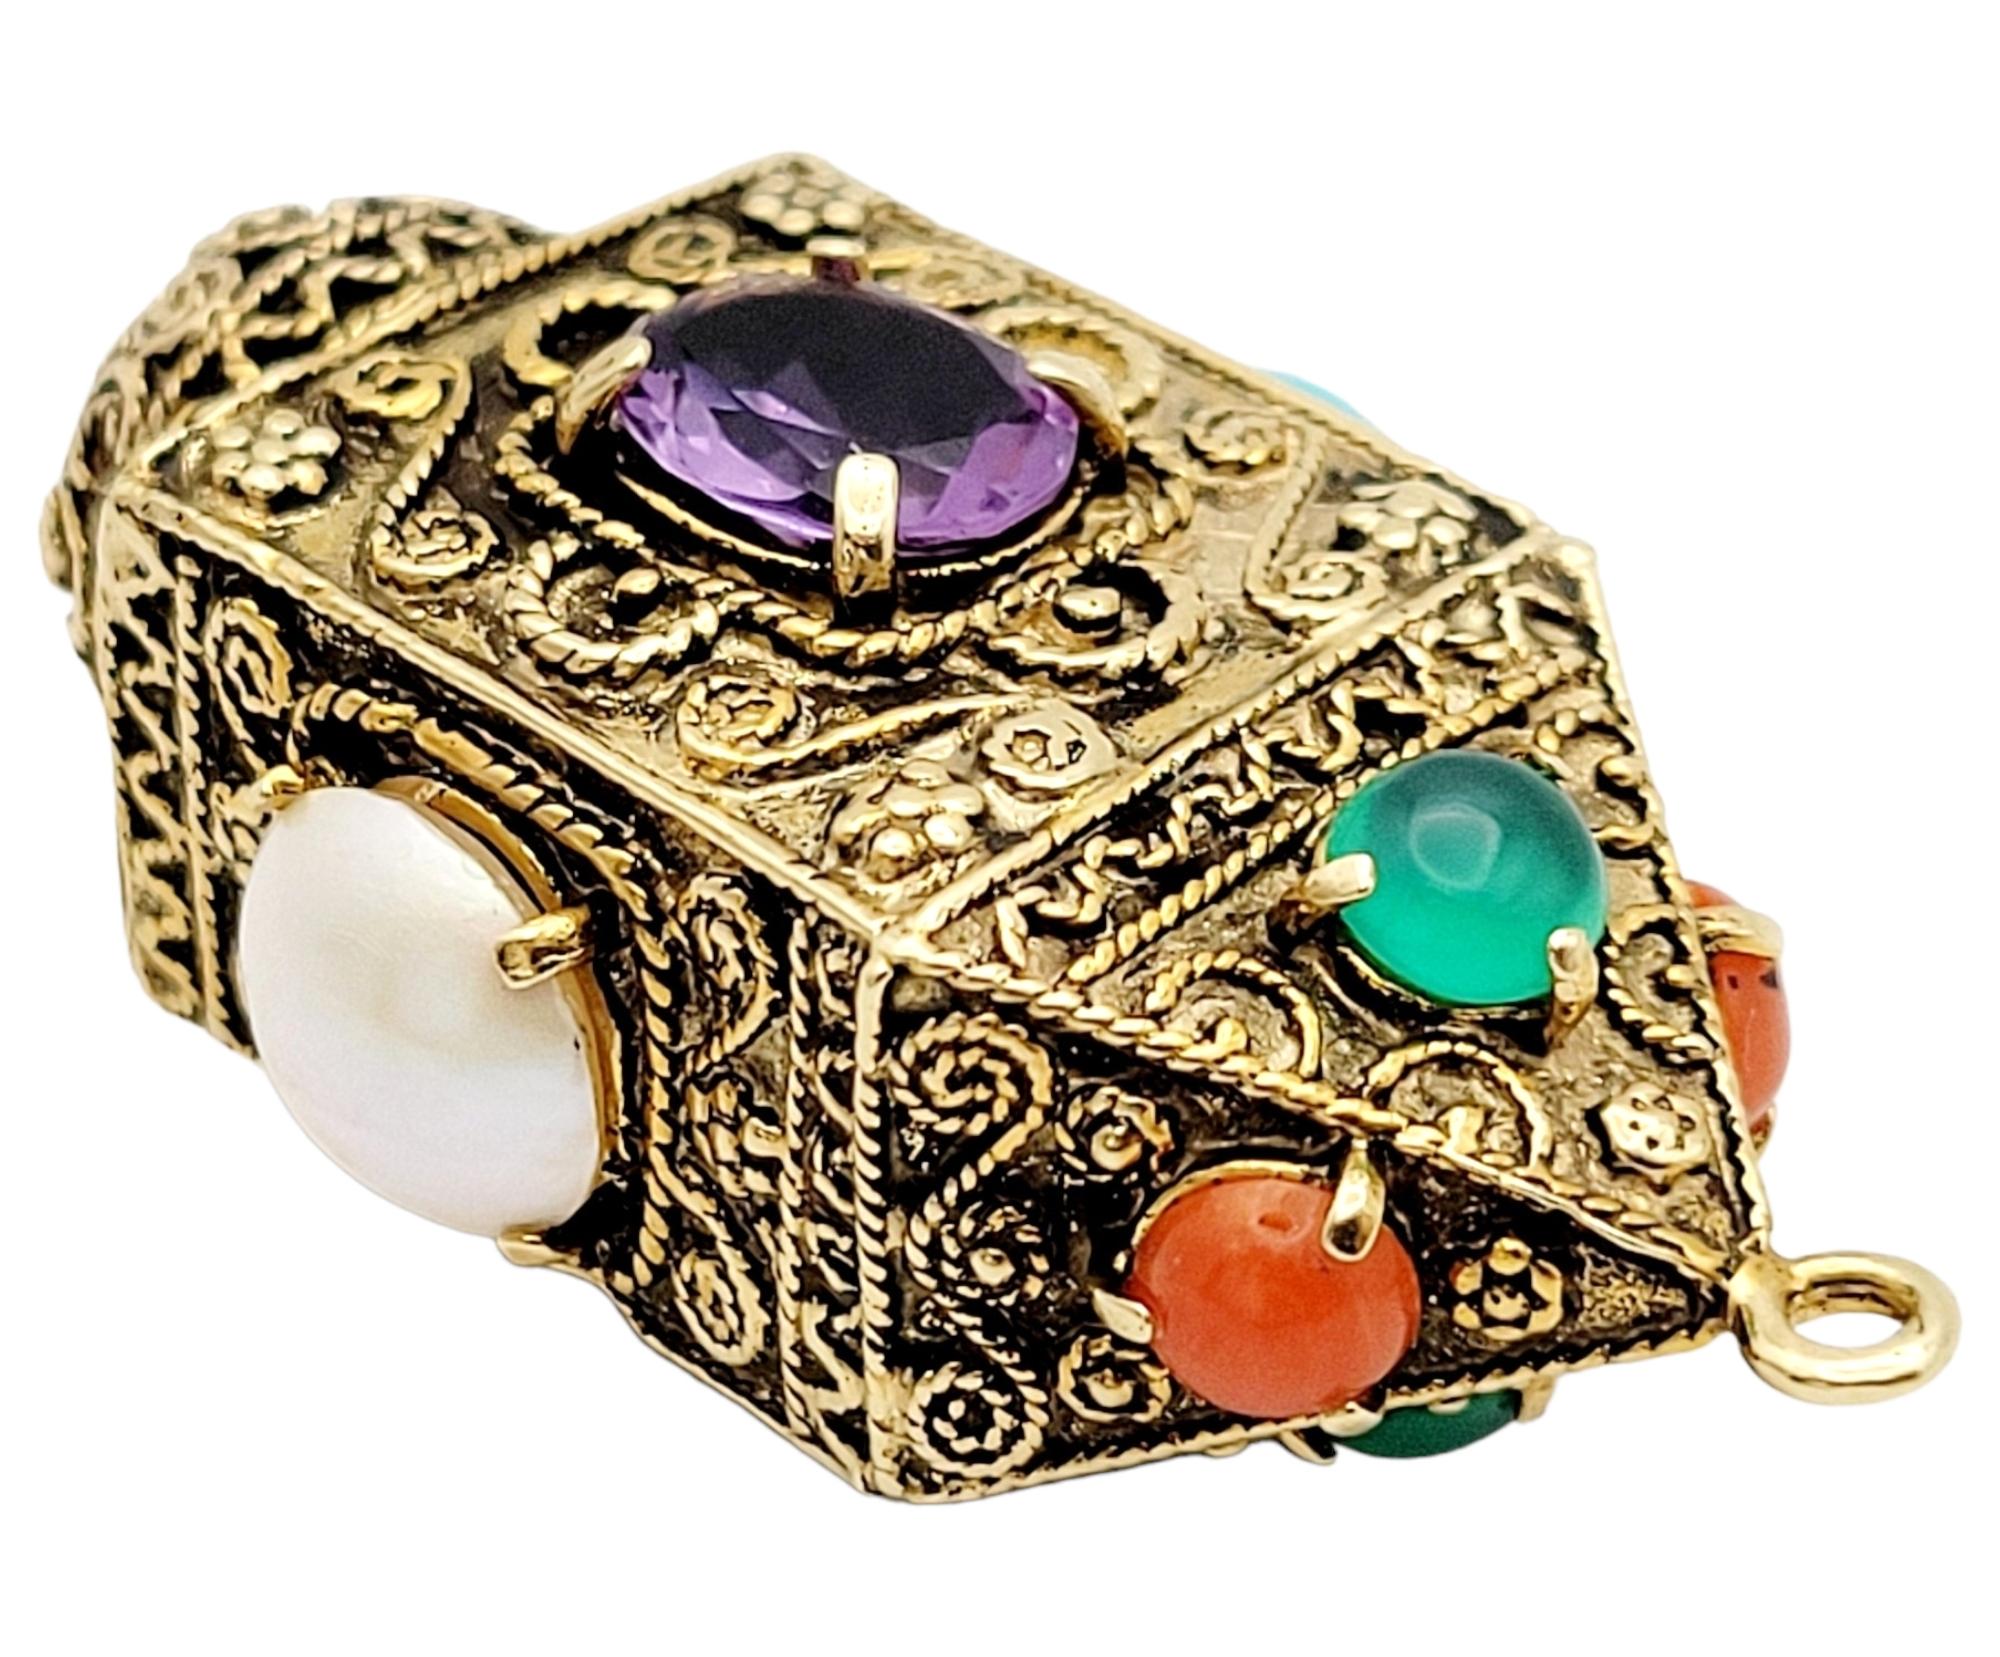 Vintage 14 Karat Yellow Gold Multi Gemstone Carved Talisman Pendant Charm In Good Condition For Sale In Scottsdale, AZ